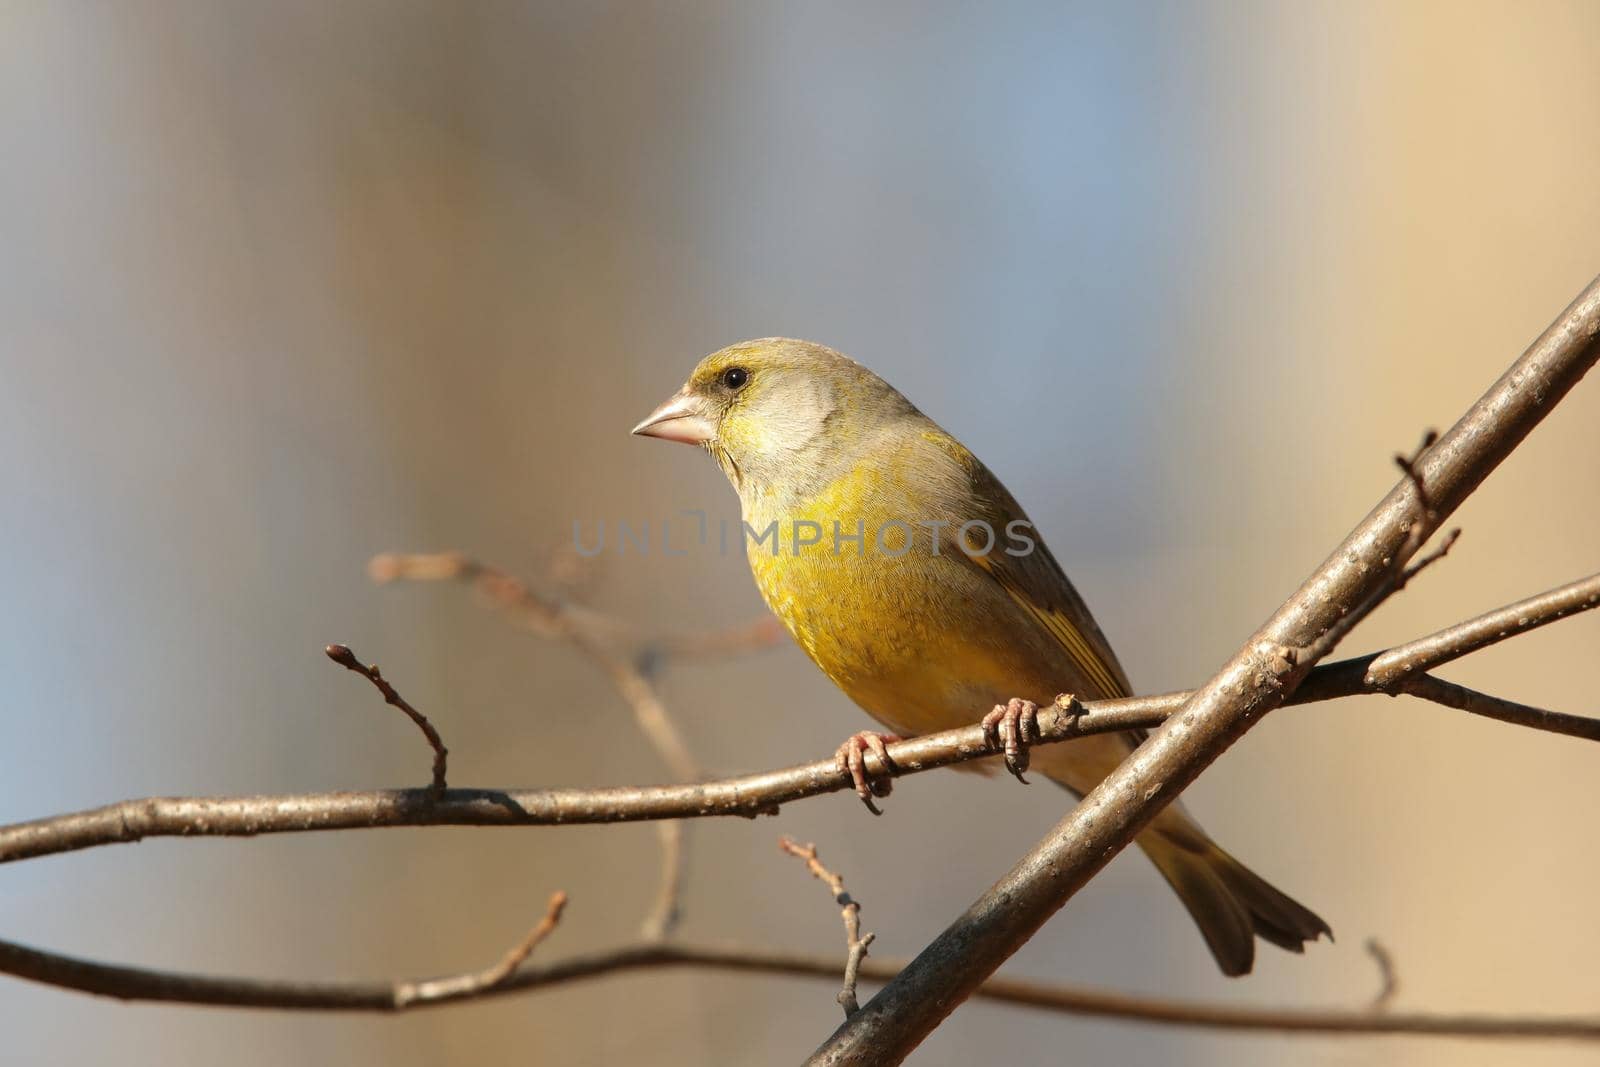 Greenfinch (Carduelis chloris) on a branch.